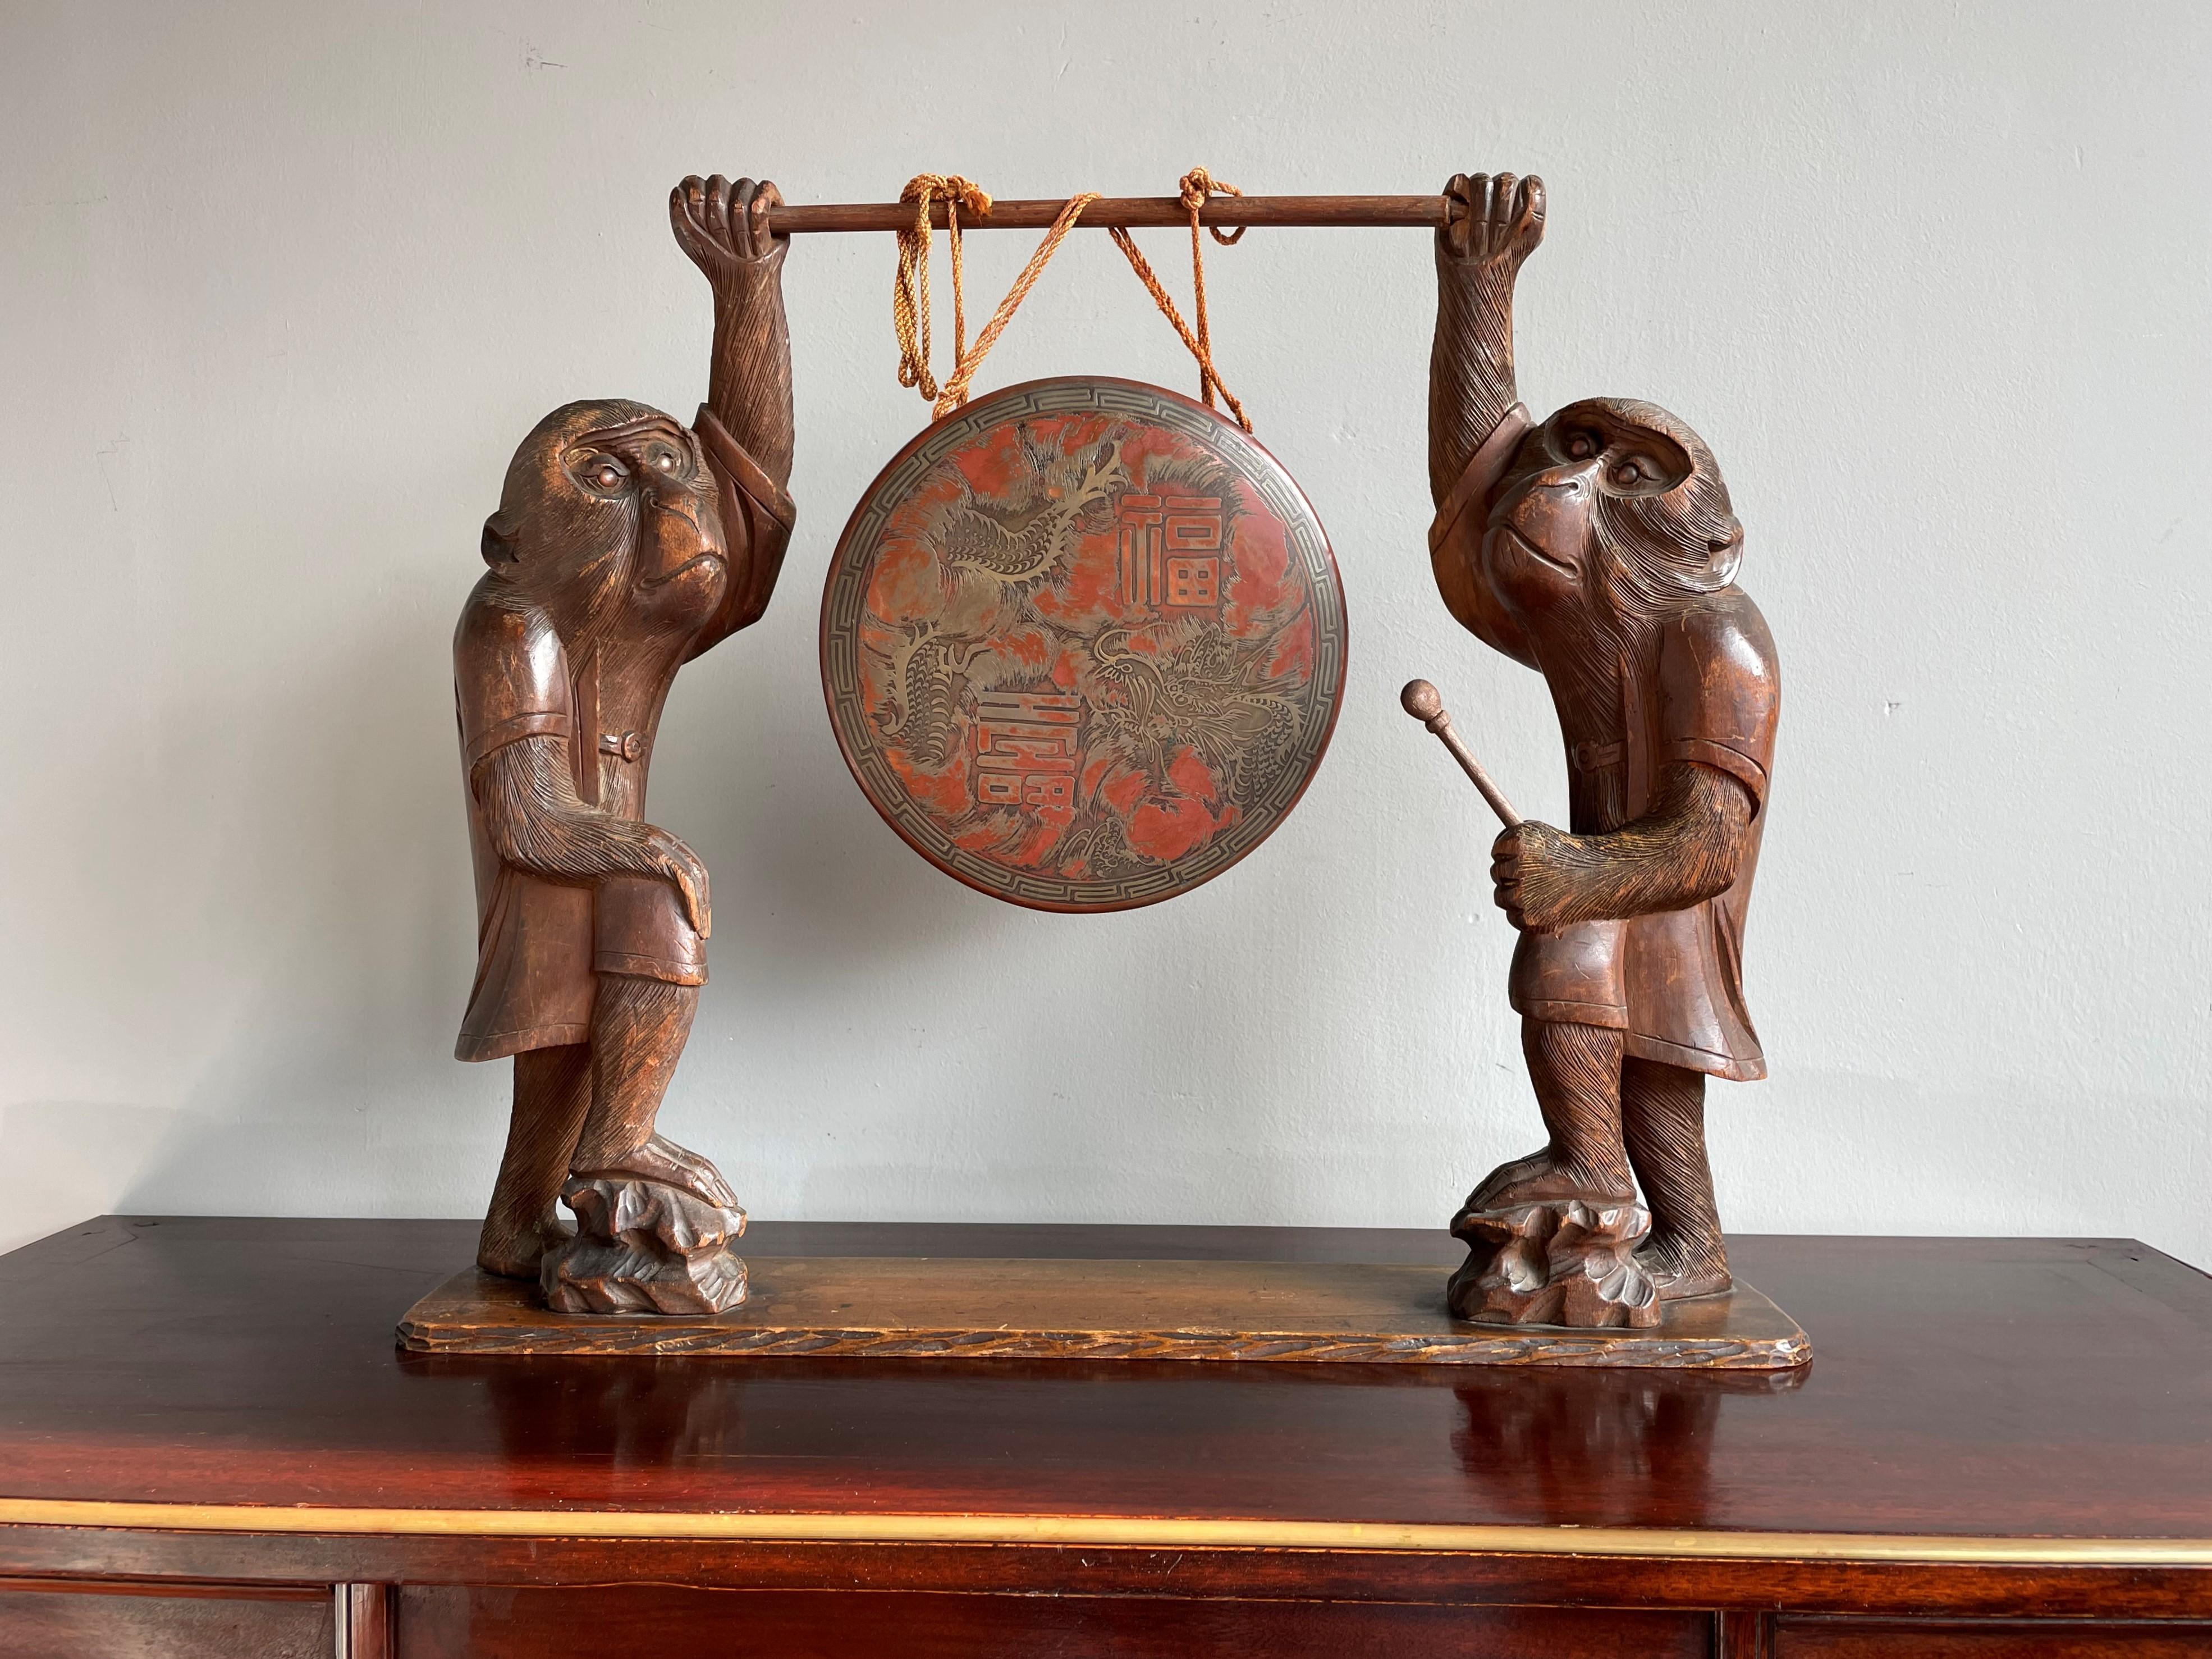 Antique Chinese Table Gong Held Up by Two Hand Carved Wooden Monkey Sculptures 10